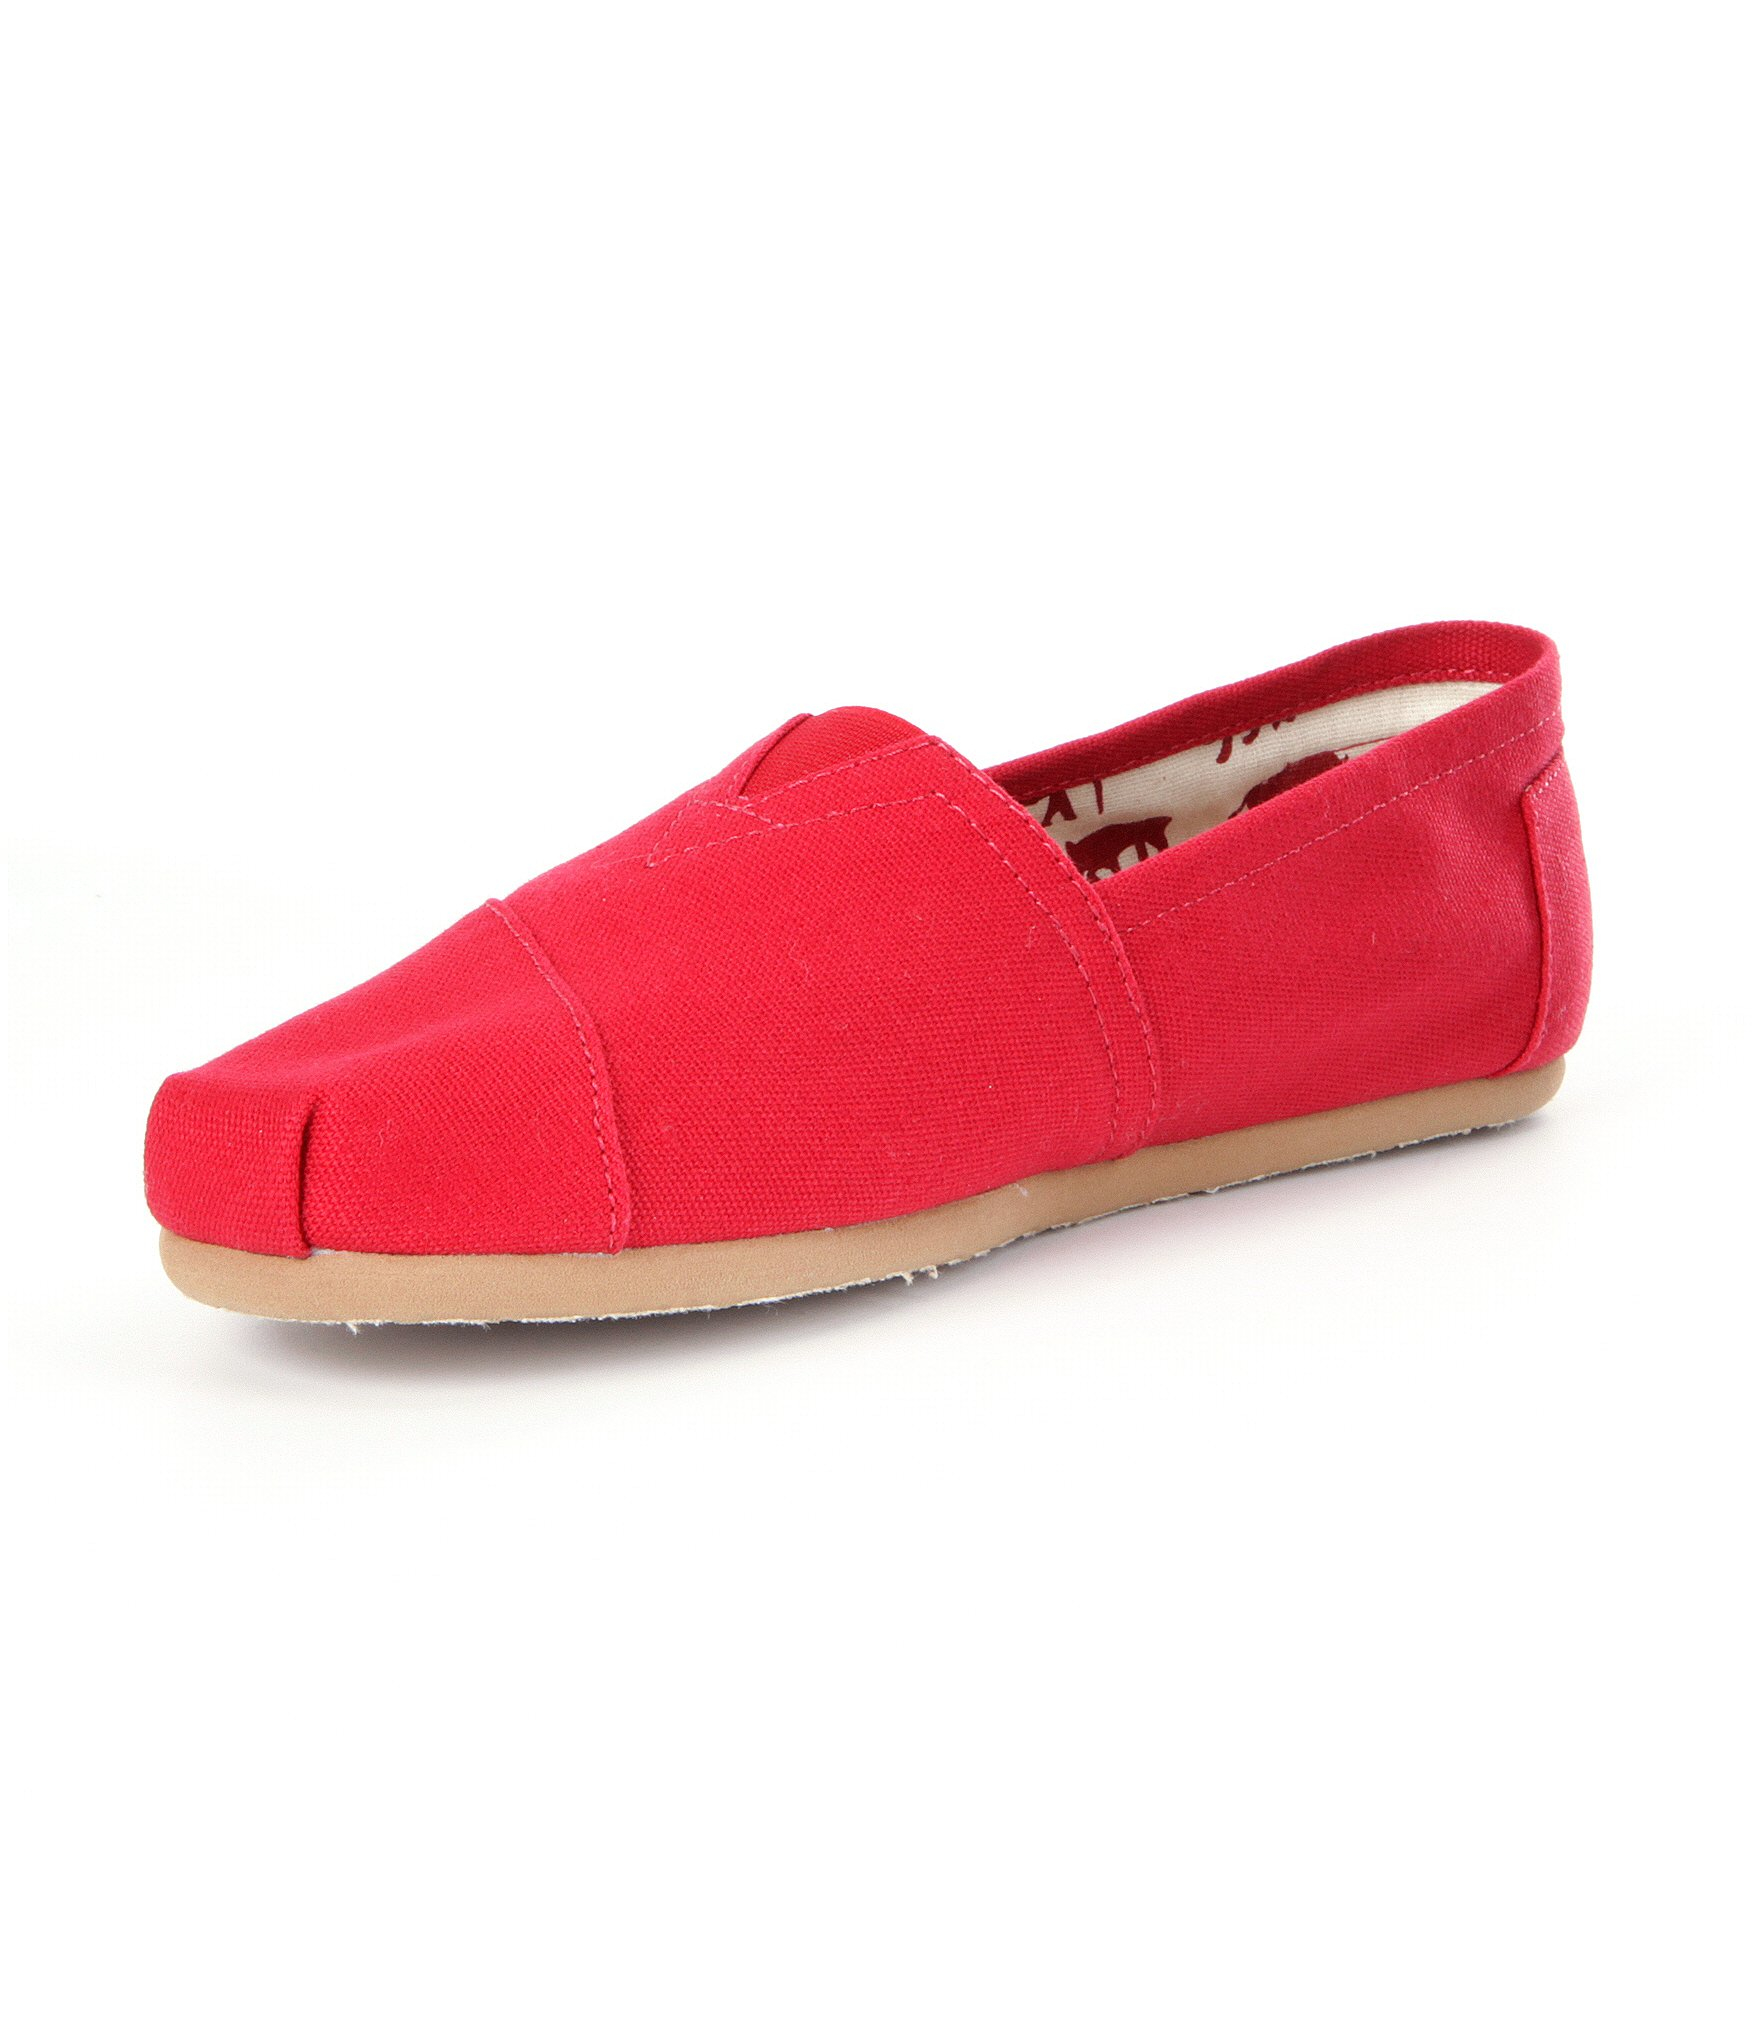 Lyst - Toms Men's Classic Alpargata Shoes in Red for Men